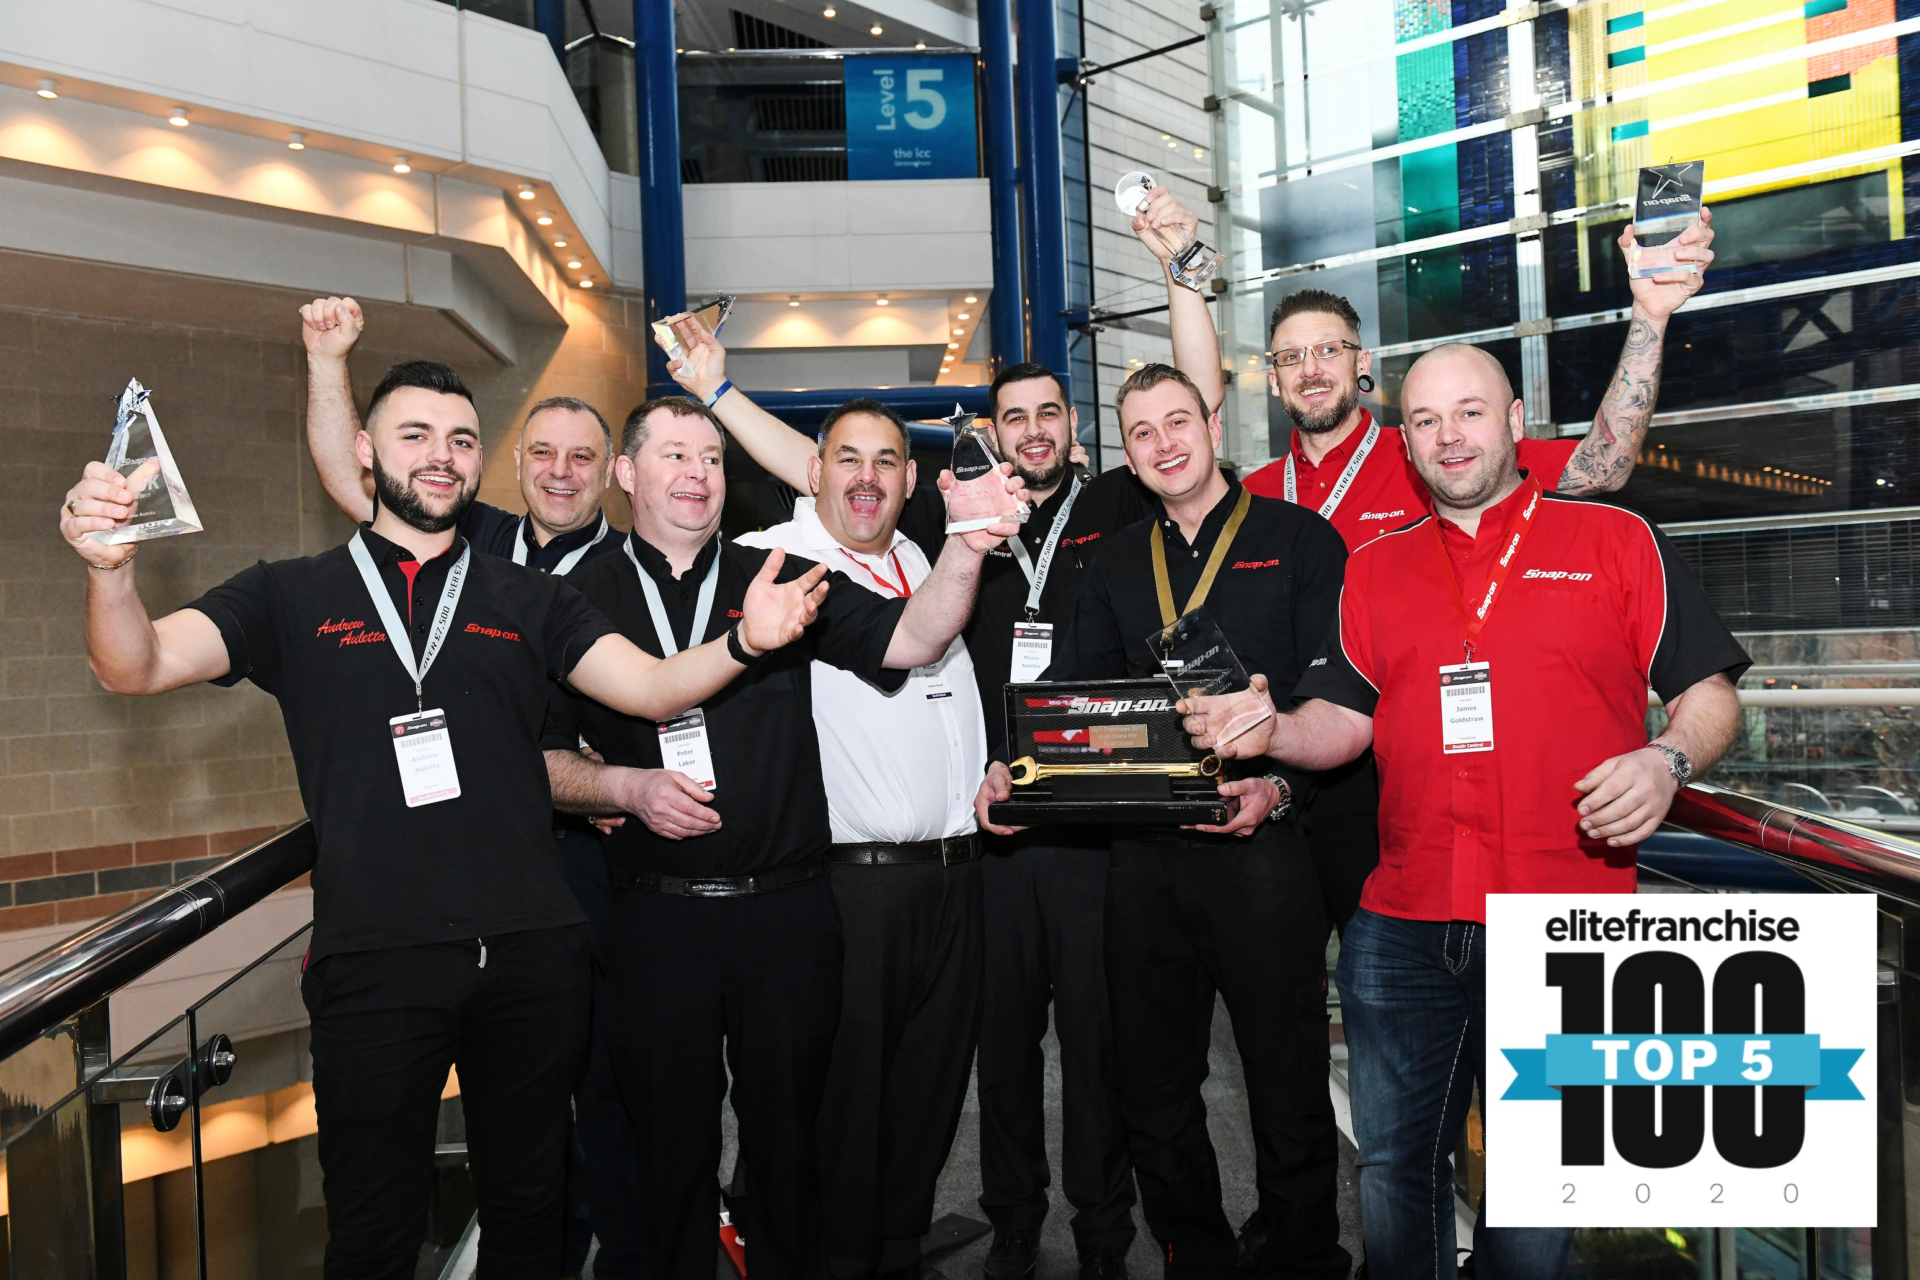 Snap-on Tops The Polls As Number One Franchise In The UK!